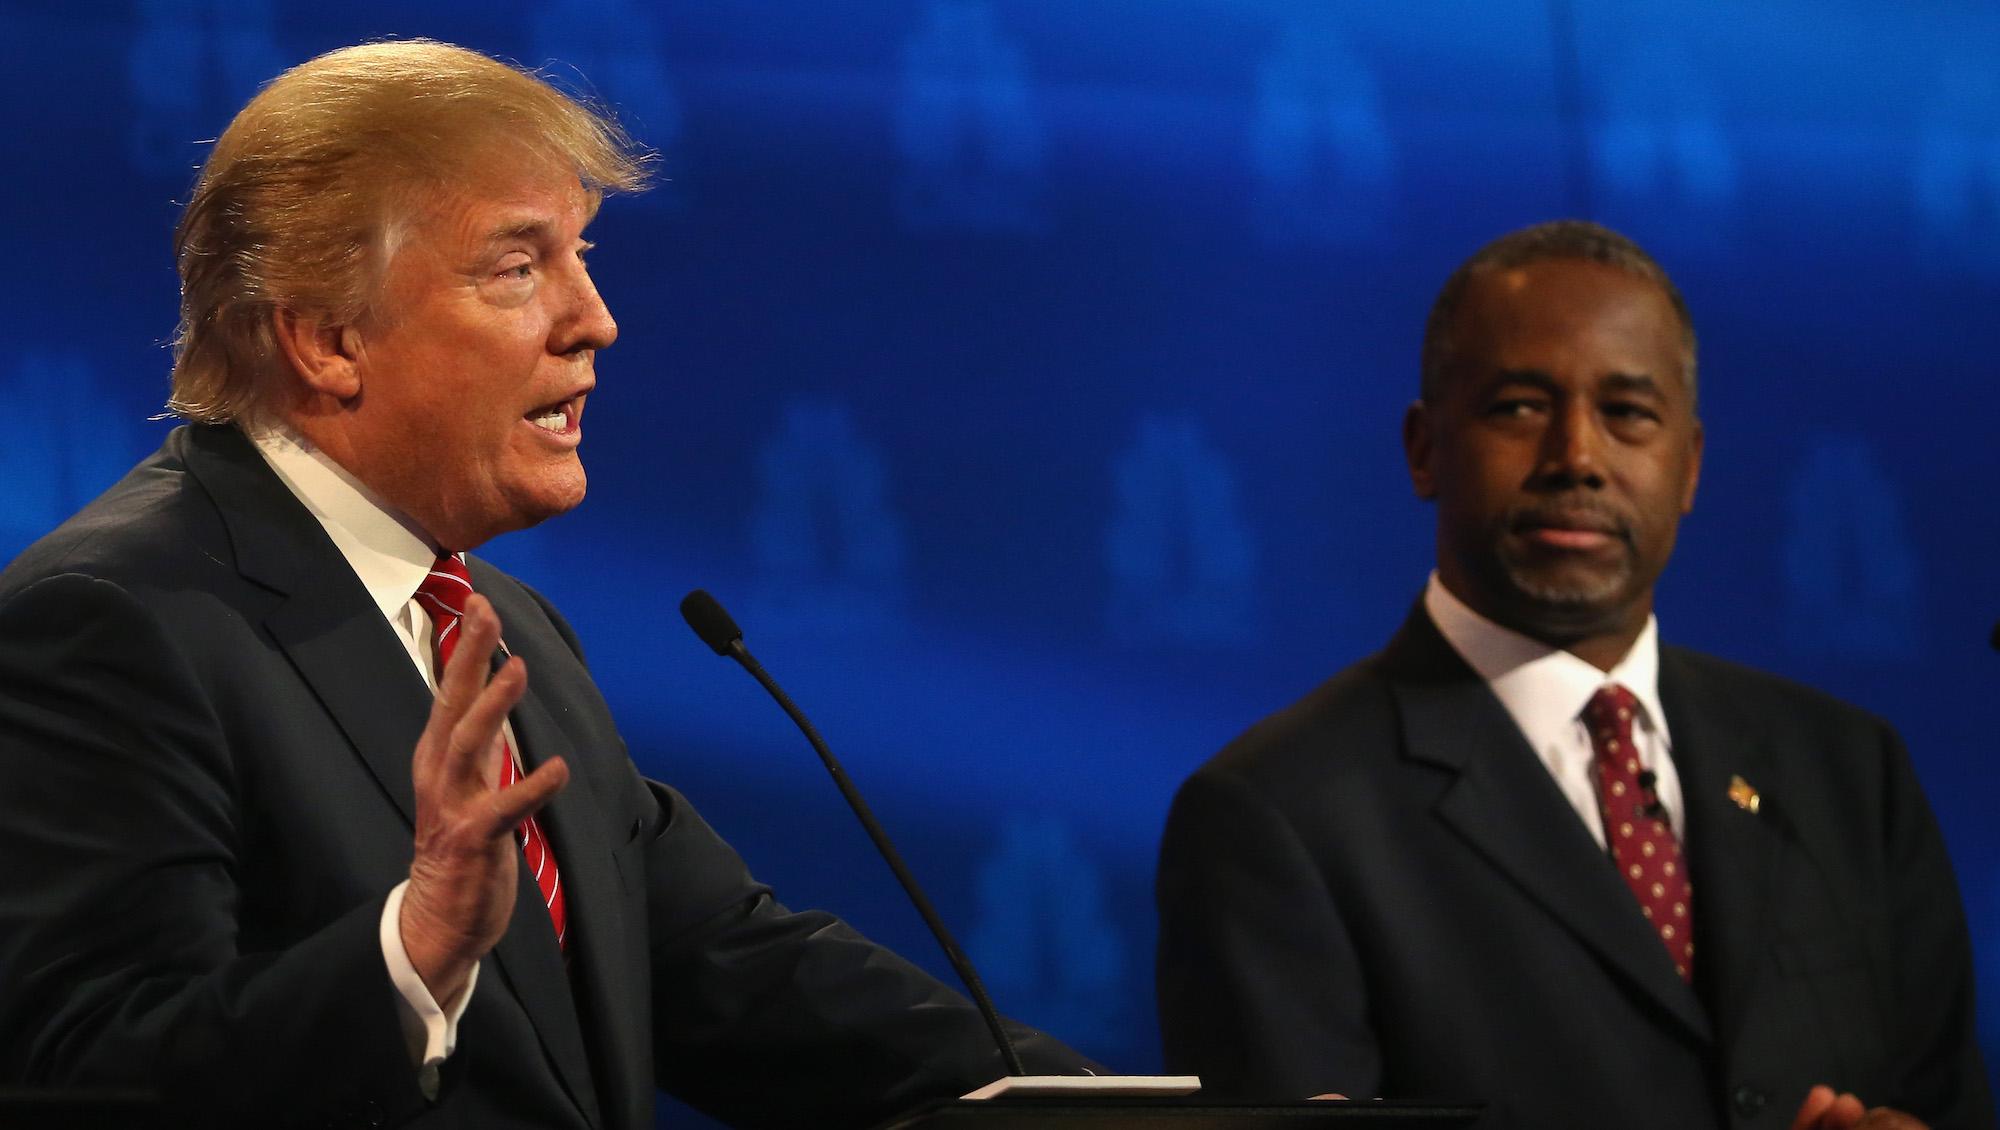 Presidential candidates Donald Trump speaks while Ben Carson looks on during the CNBC Republican Presidential Debate at University of Colorados Coors Events Center October 28, 2015 in Boulder, Colorado. Fourteen Republican presidential candidates are participating in the third set of Republican presidential debates.